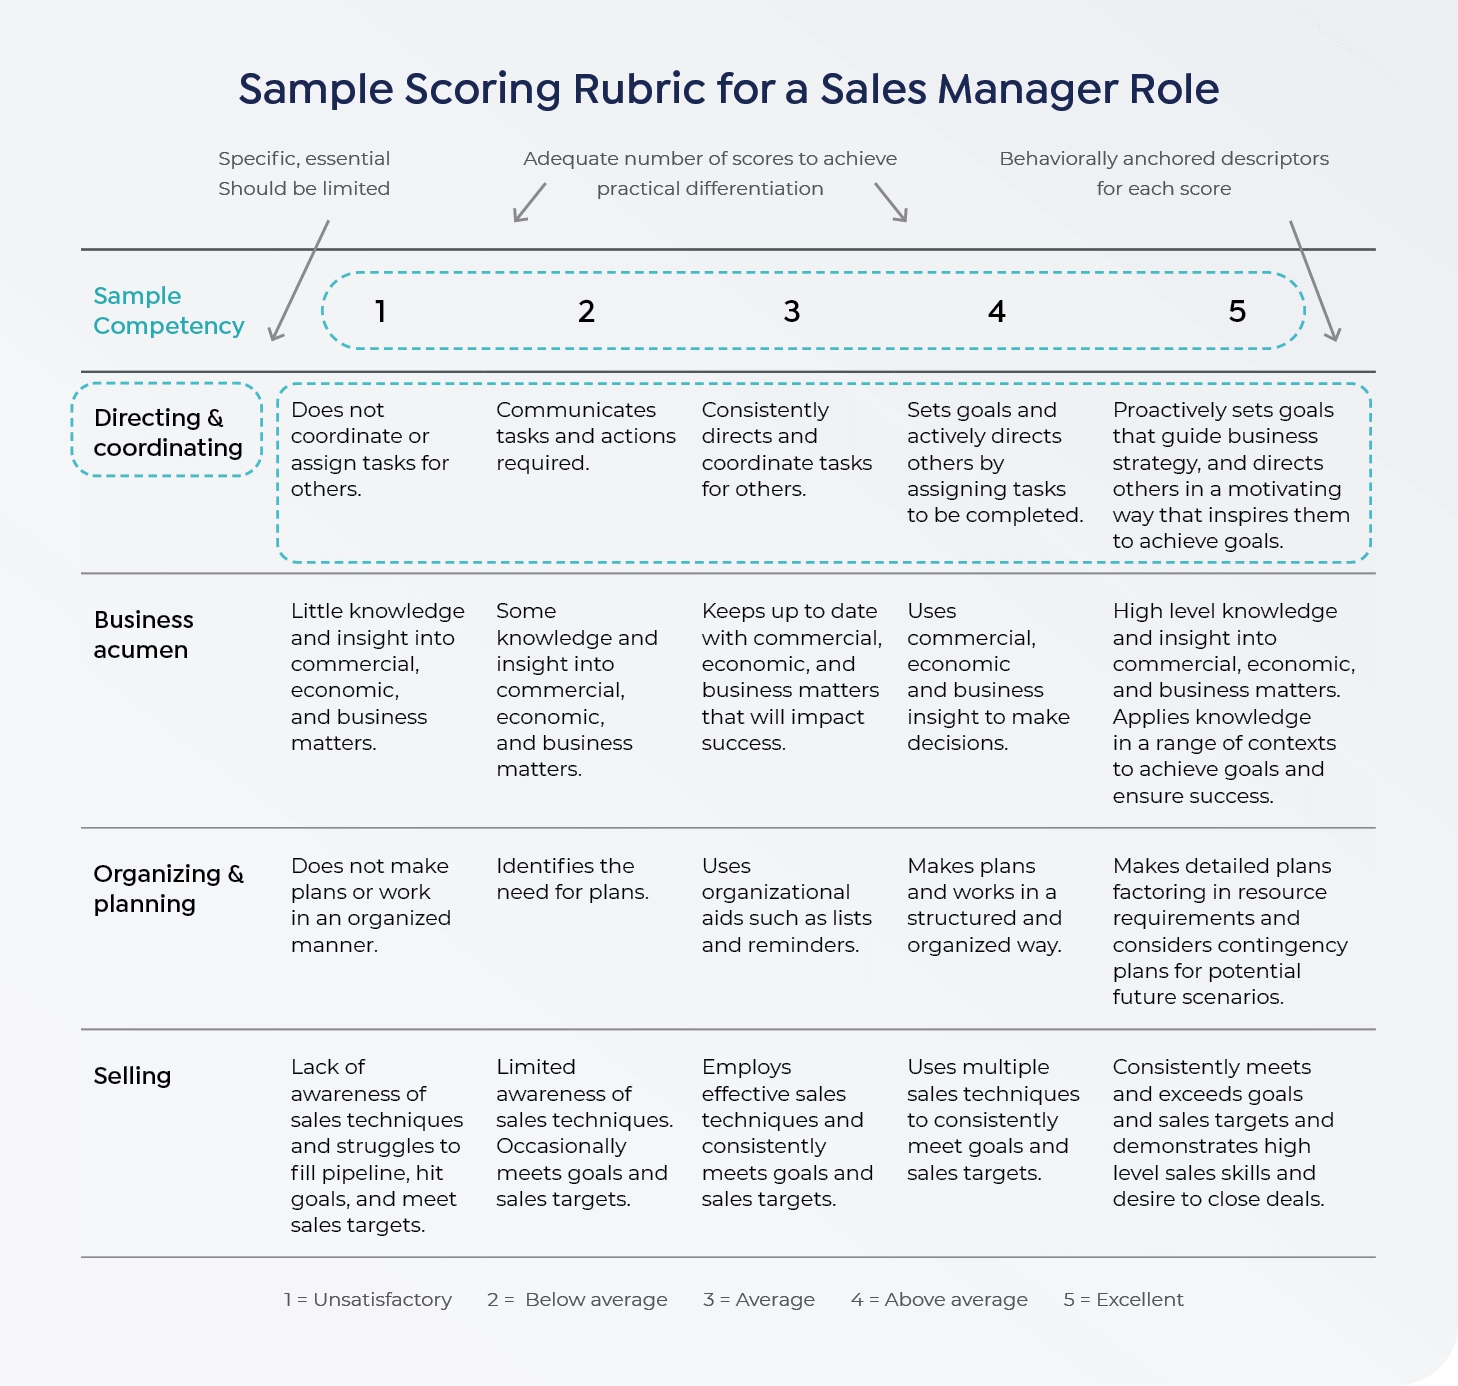 Sample scoring rubric for a sales manager role